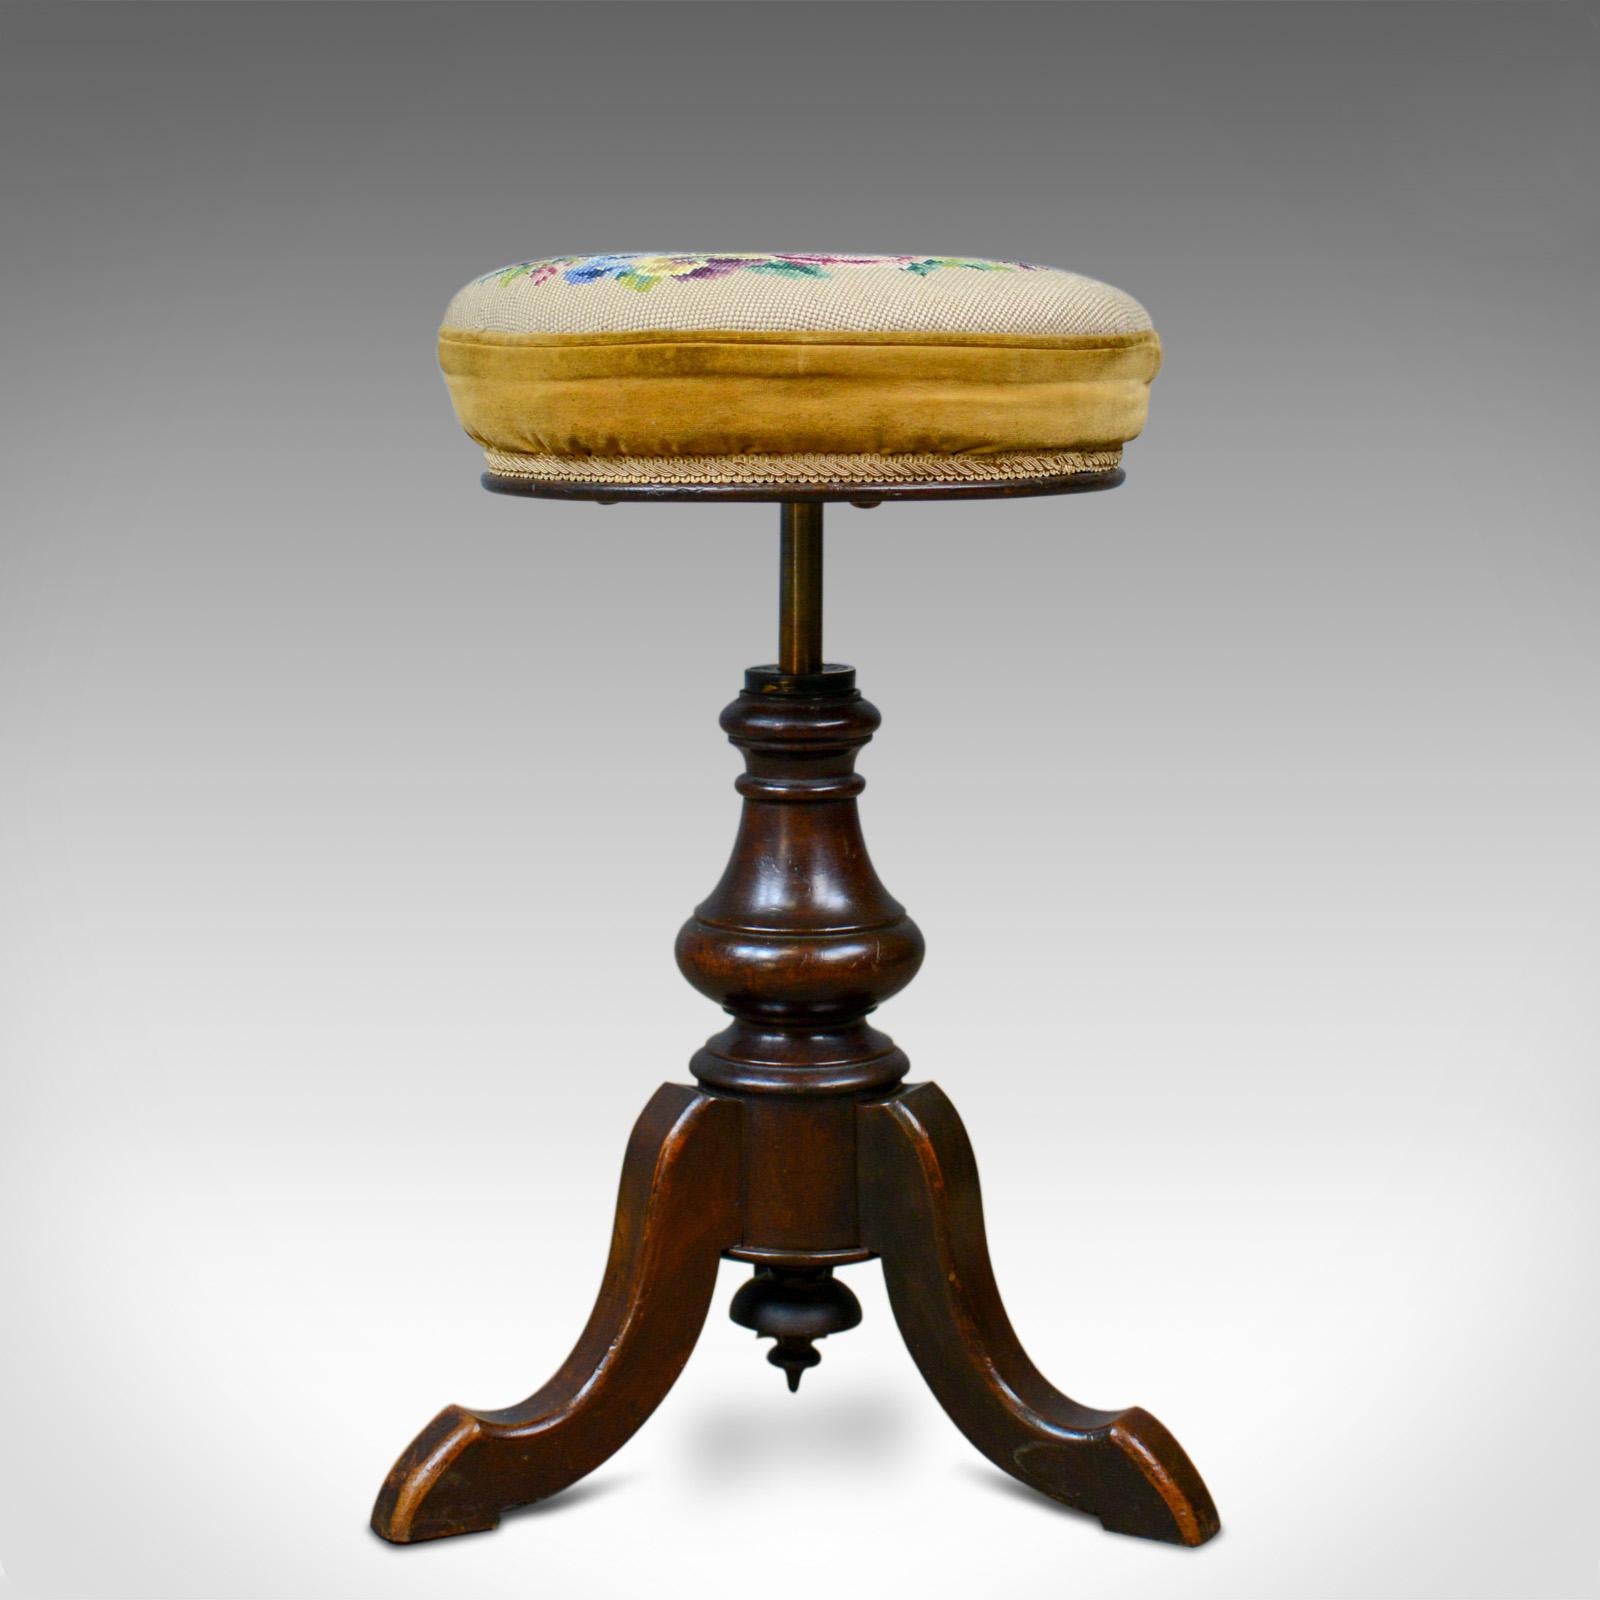 This is an adjustable, antique piano stool. An English, Victorian, walnut music stool with needlepoint tapestry seat pad dating to the latter part of the 19th century, circa 1880.

Beautifully made in solid walnut with a waxed finish and desirable